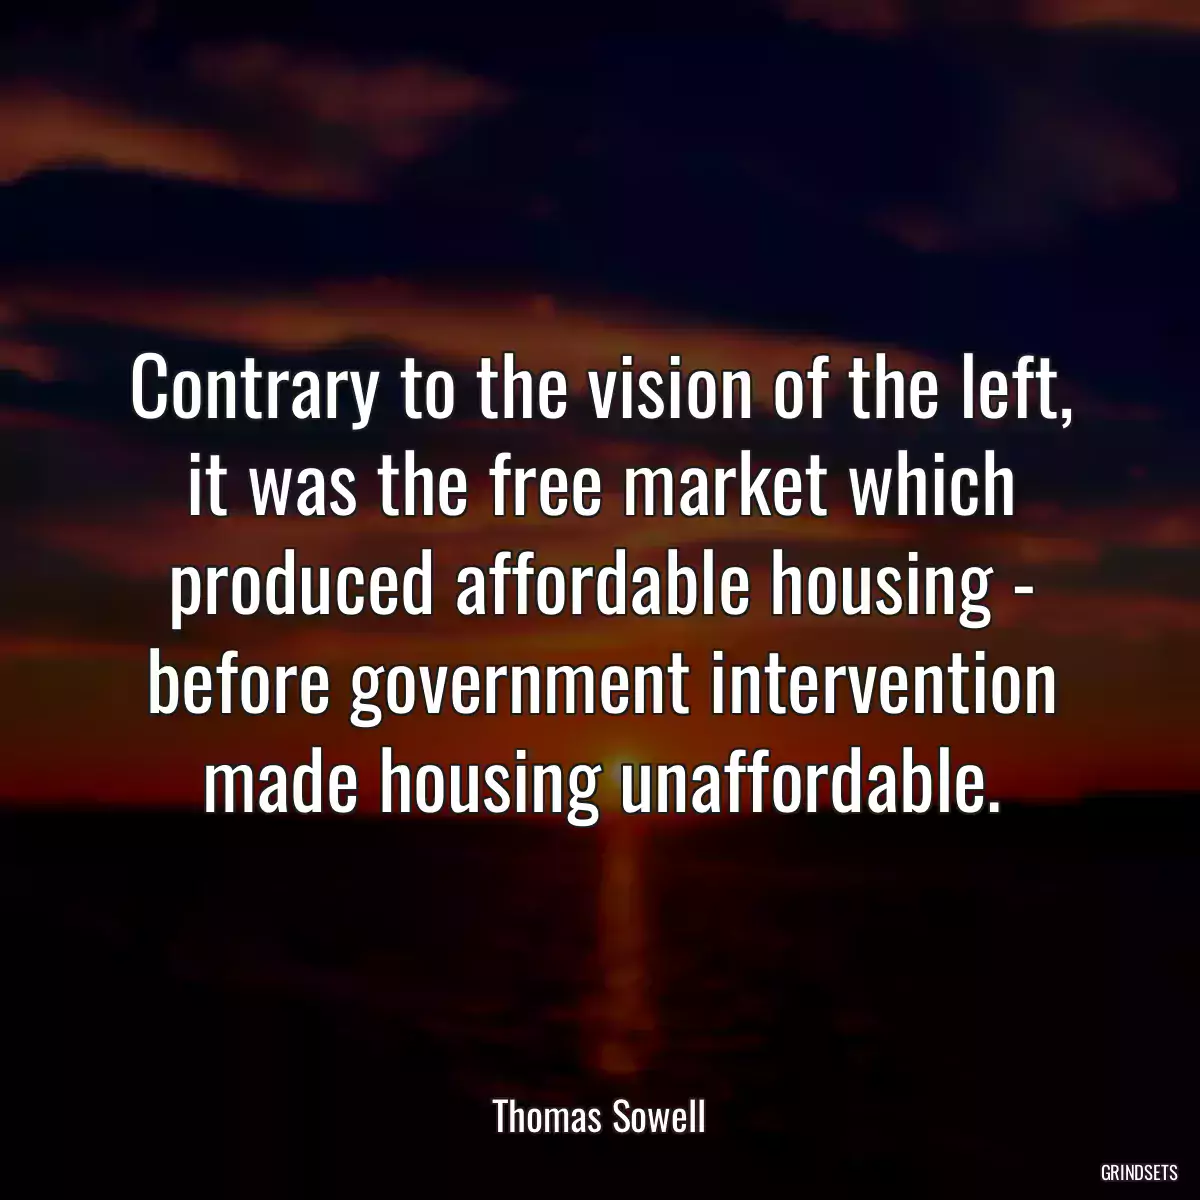 Contrary to the vision of the left, it was the free market which produced affordable housing - before government intervention made housing unaffordable.